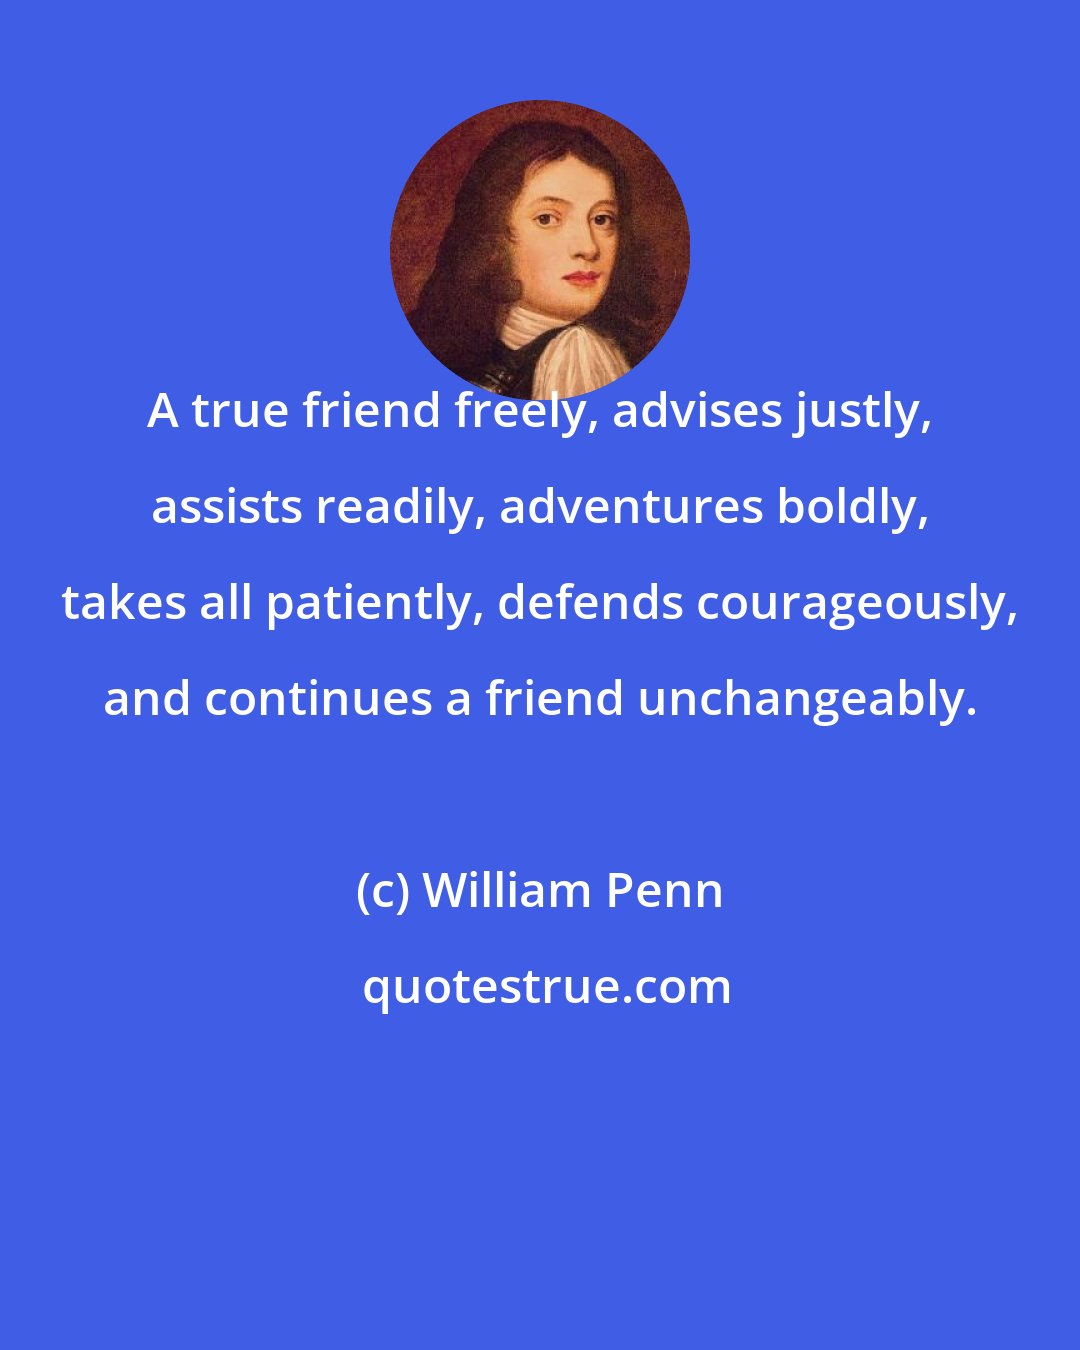 William Penn: A true friend freely, advises justly, assists readily, adventures boldly, takes all patiently, defends courageously, and continues a friend unchangeably.